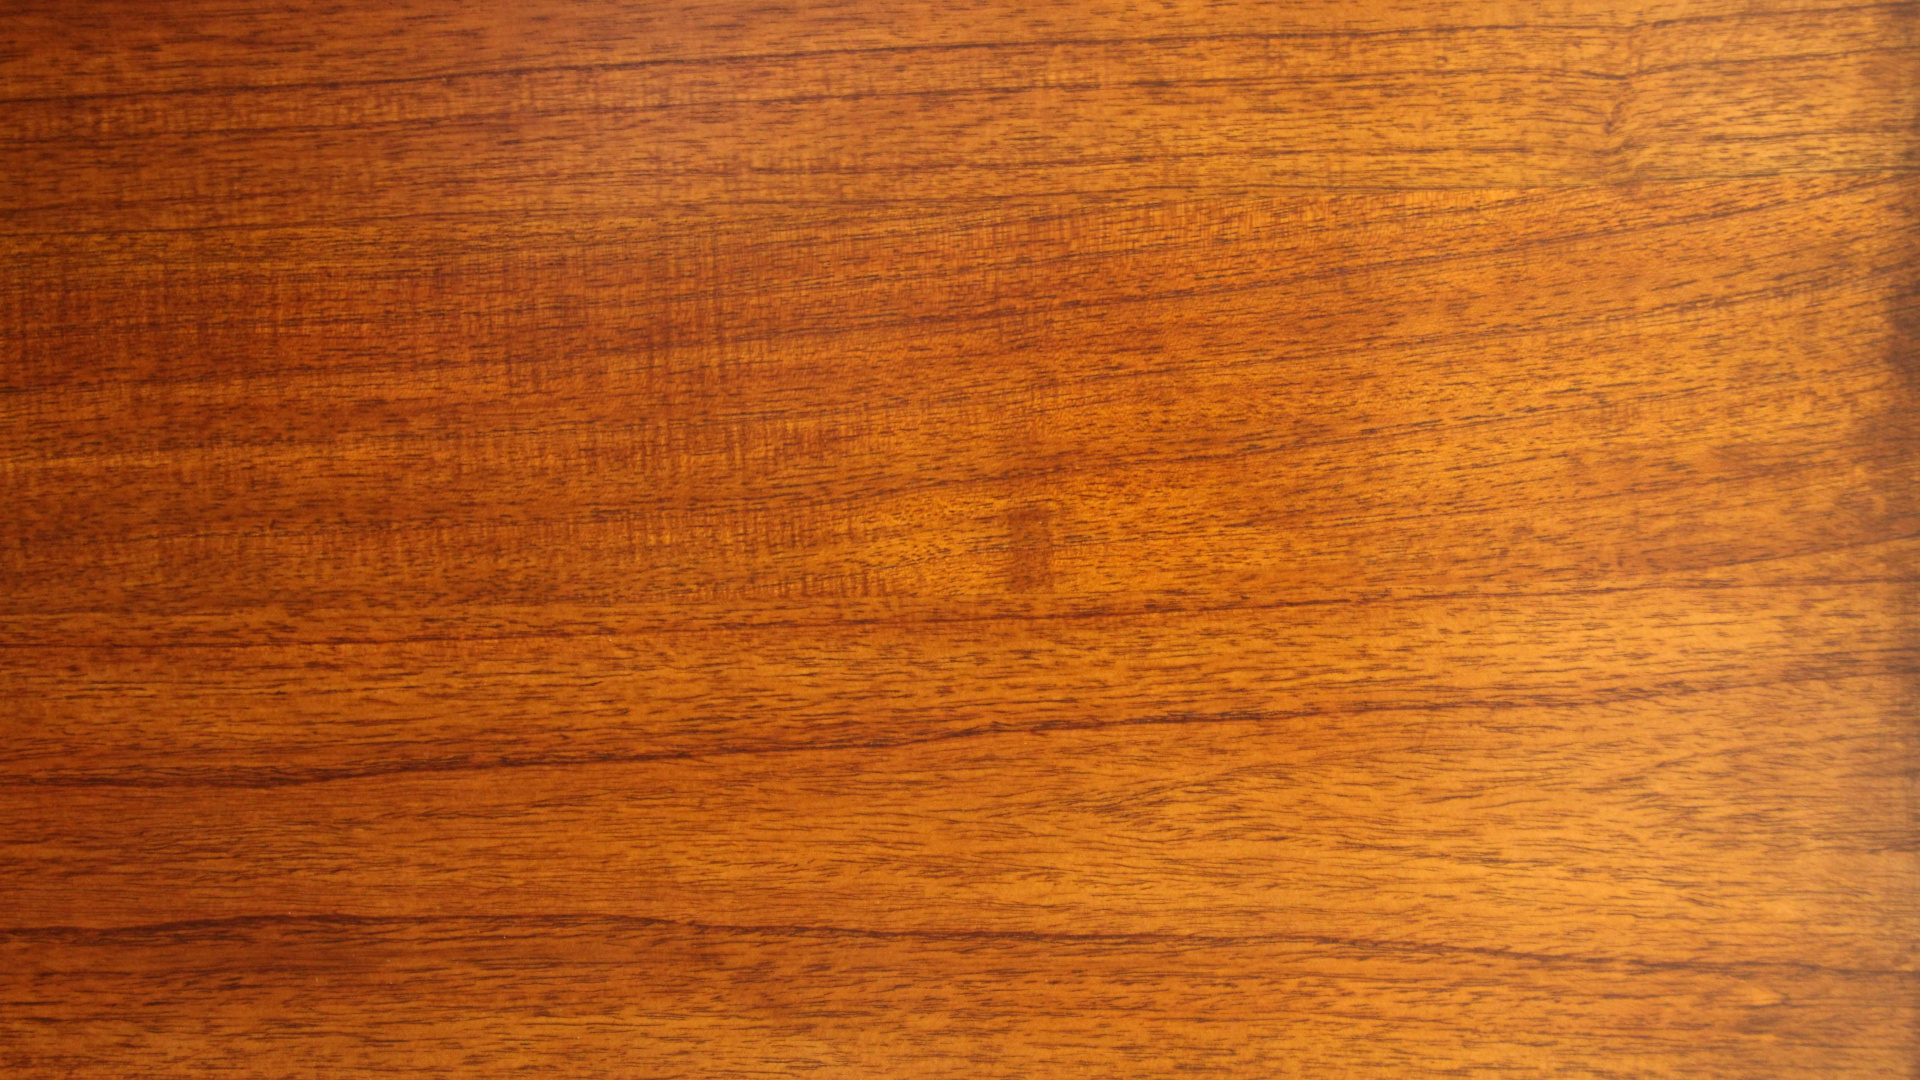 Brown Wooden Table With White Paper. Wallpaper in 1920x1080 Resolution